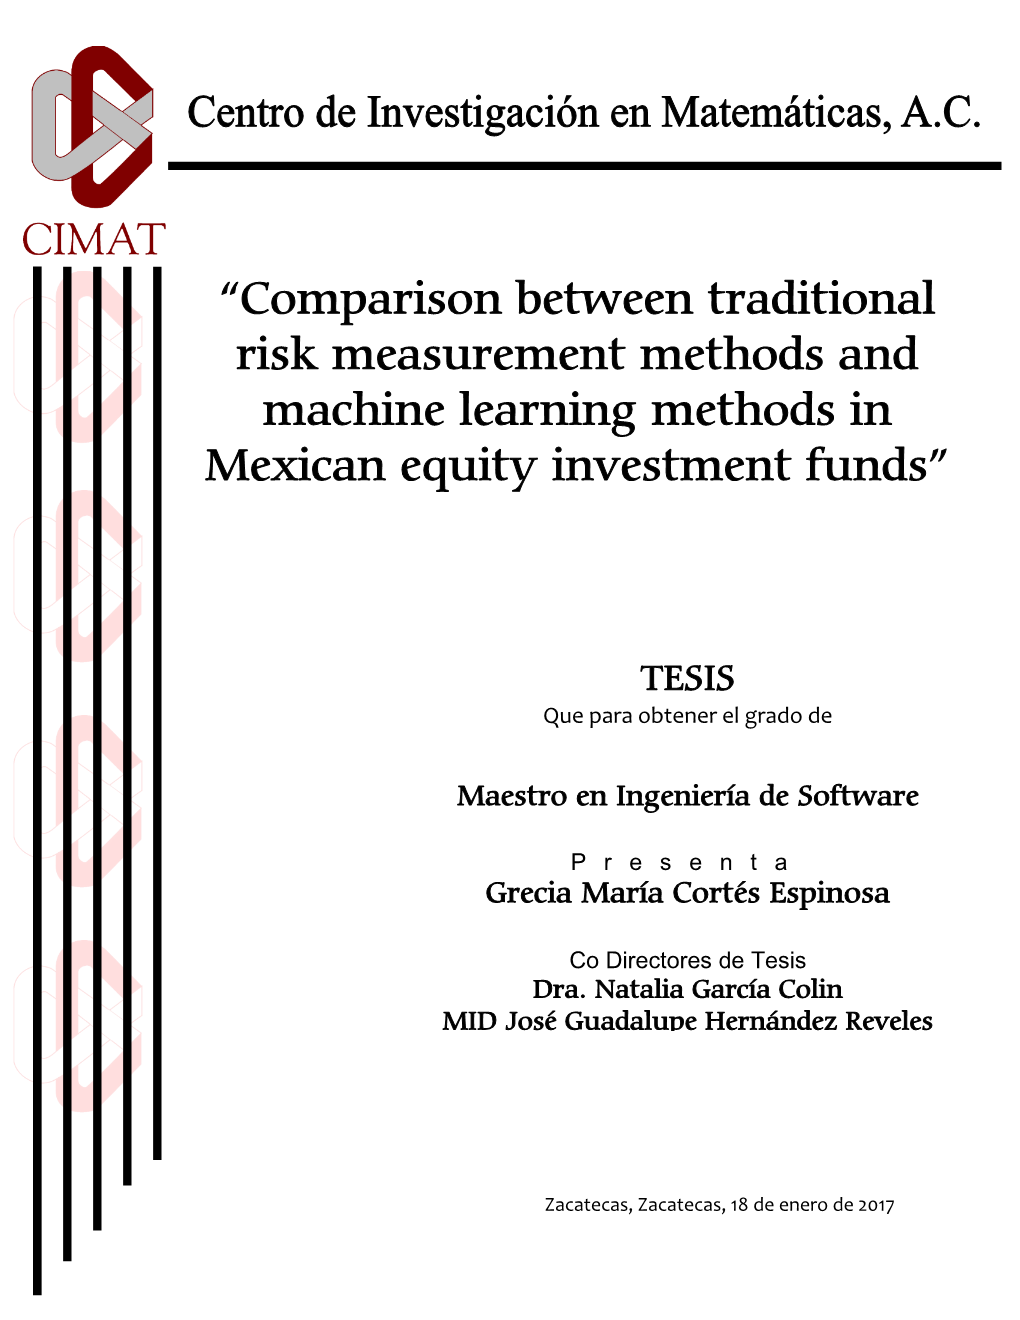 Comparison Between Traditional Risk Measurement Methods and Machine Learning Methods in Mexican Equity Investment Funds”